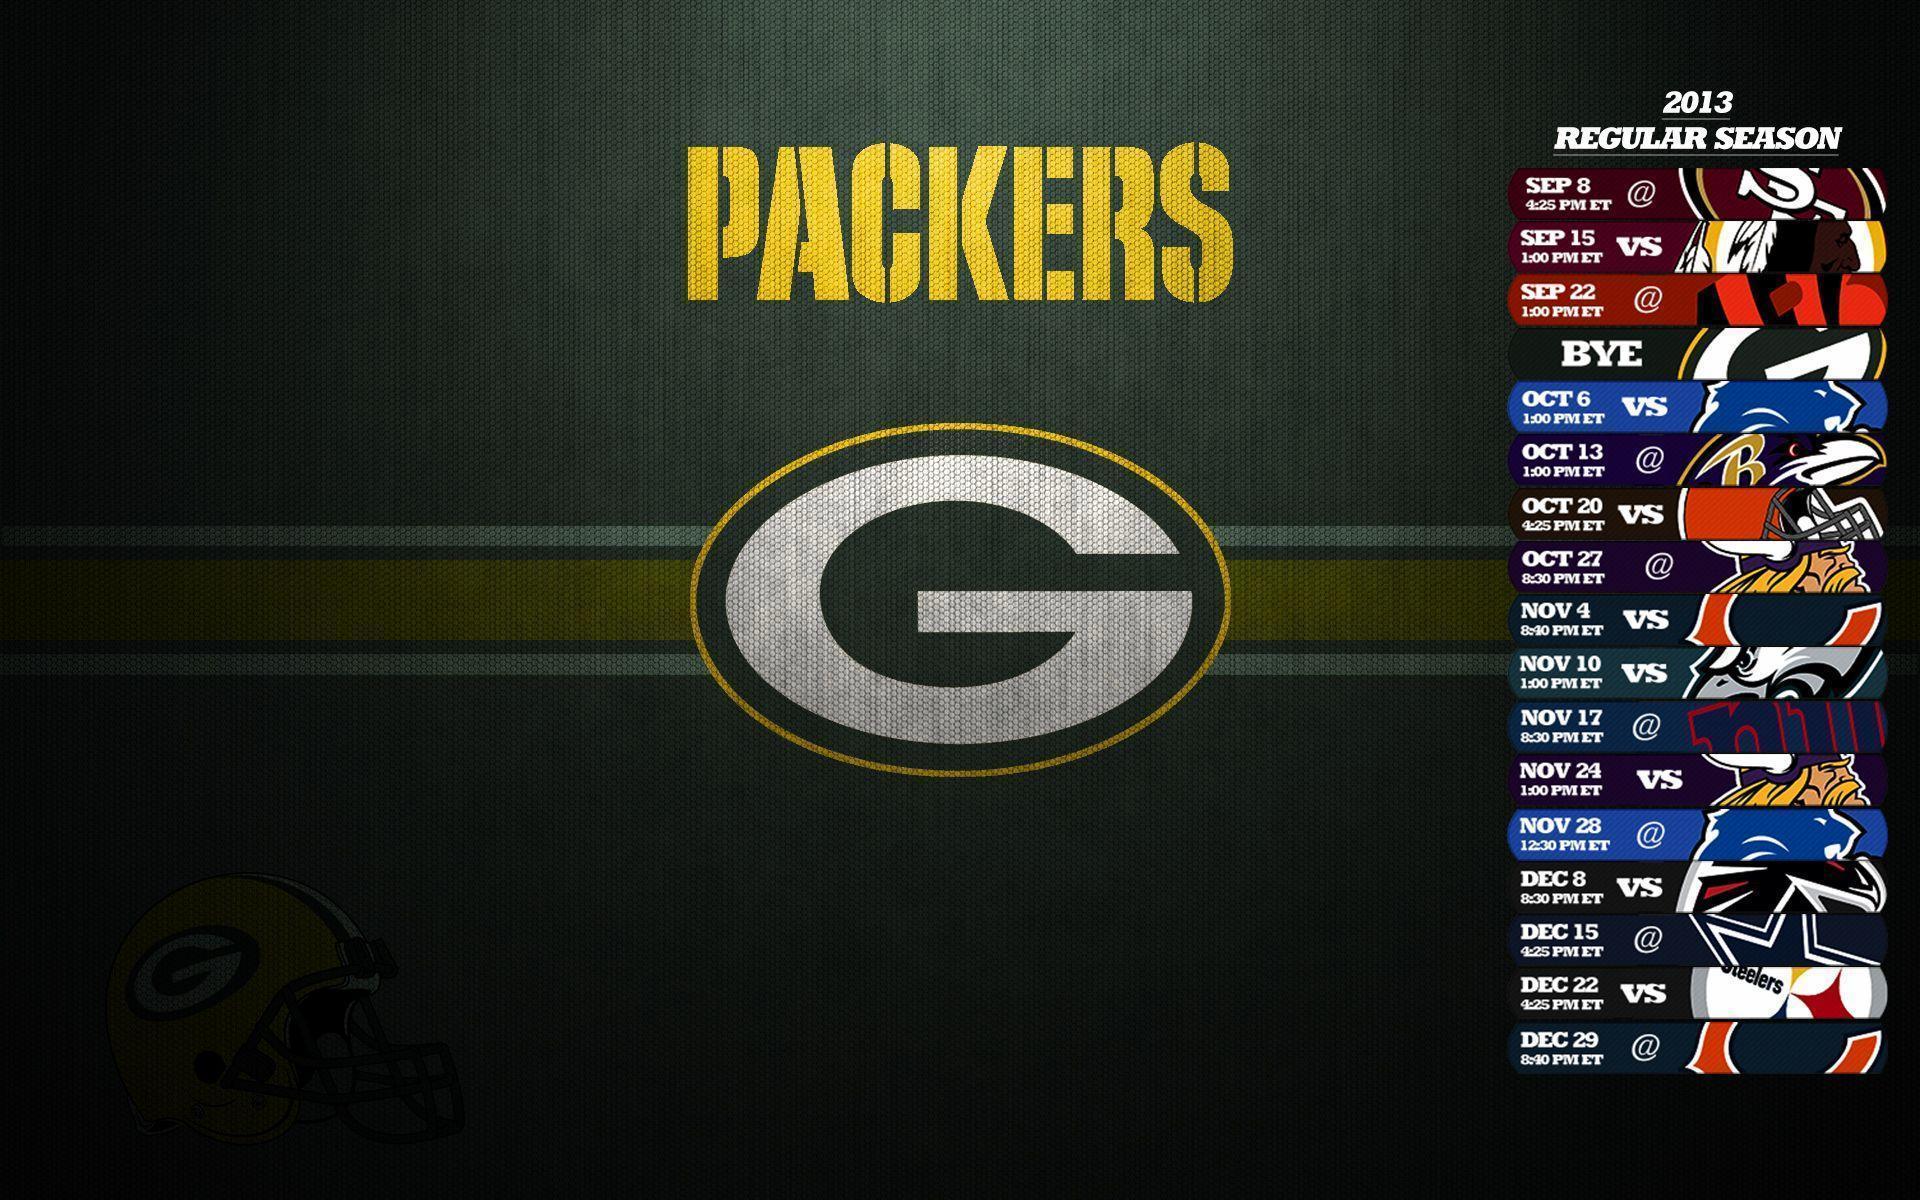 Green Bay Packers image Green Bay Packers Schedule 2013 Wallpaper